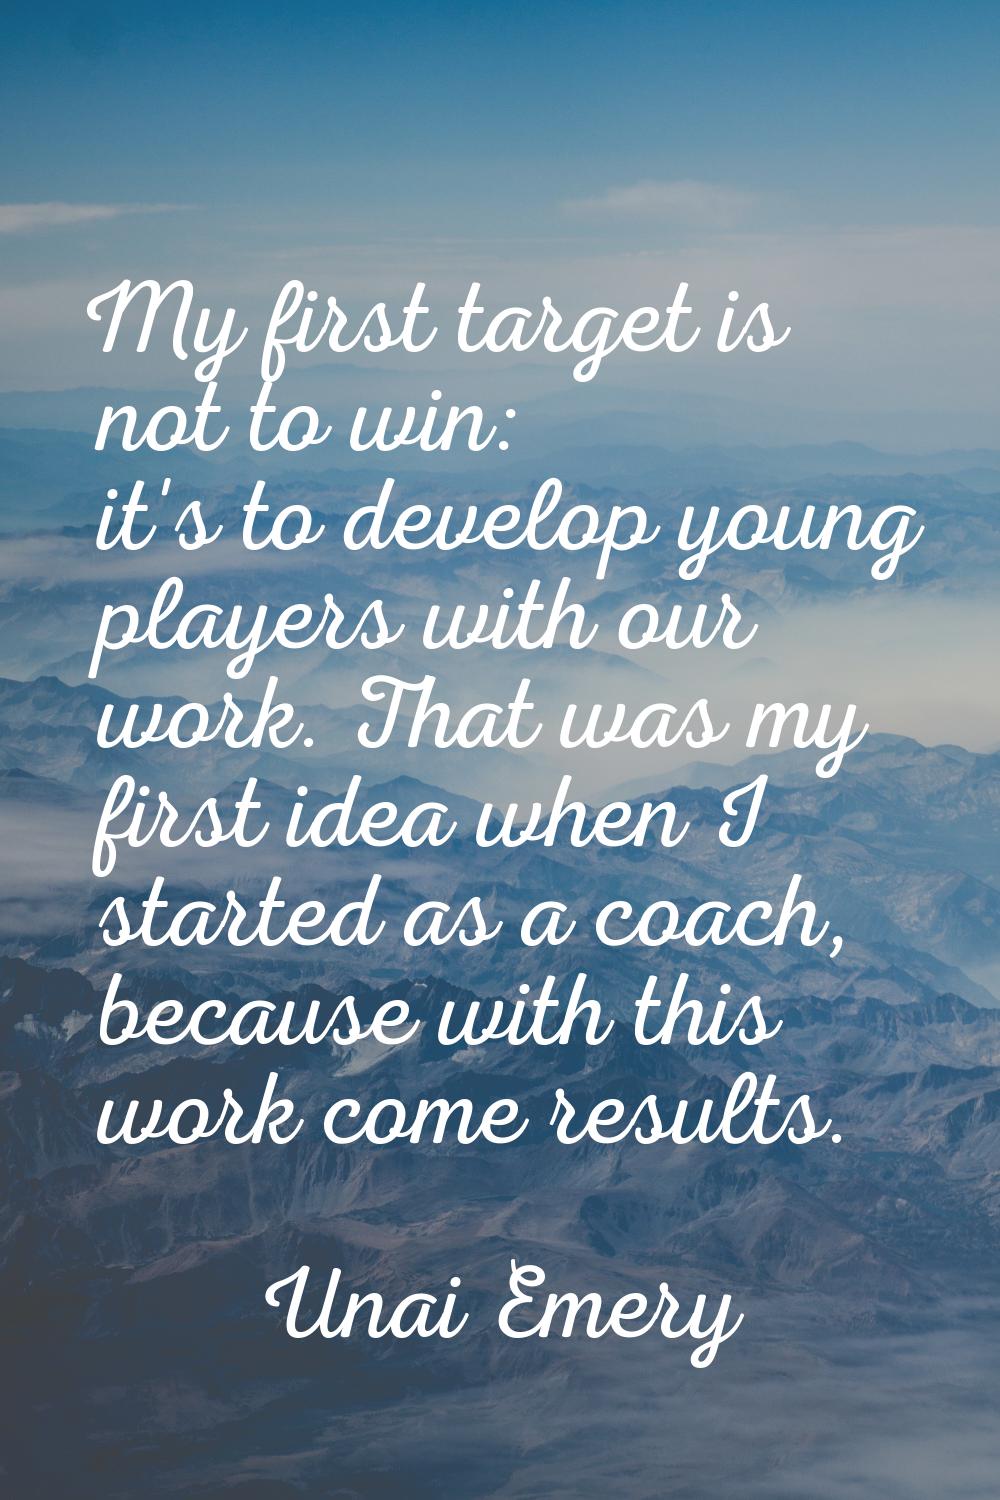 My first target is not to win: it's to develop young players with our work. That was my first idea 